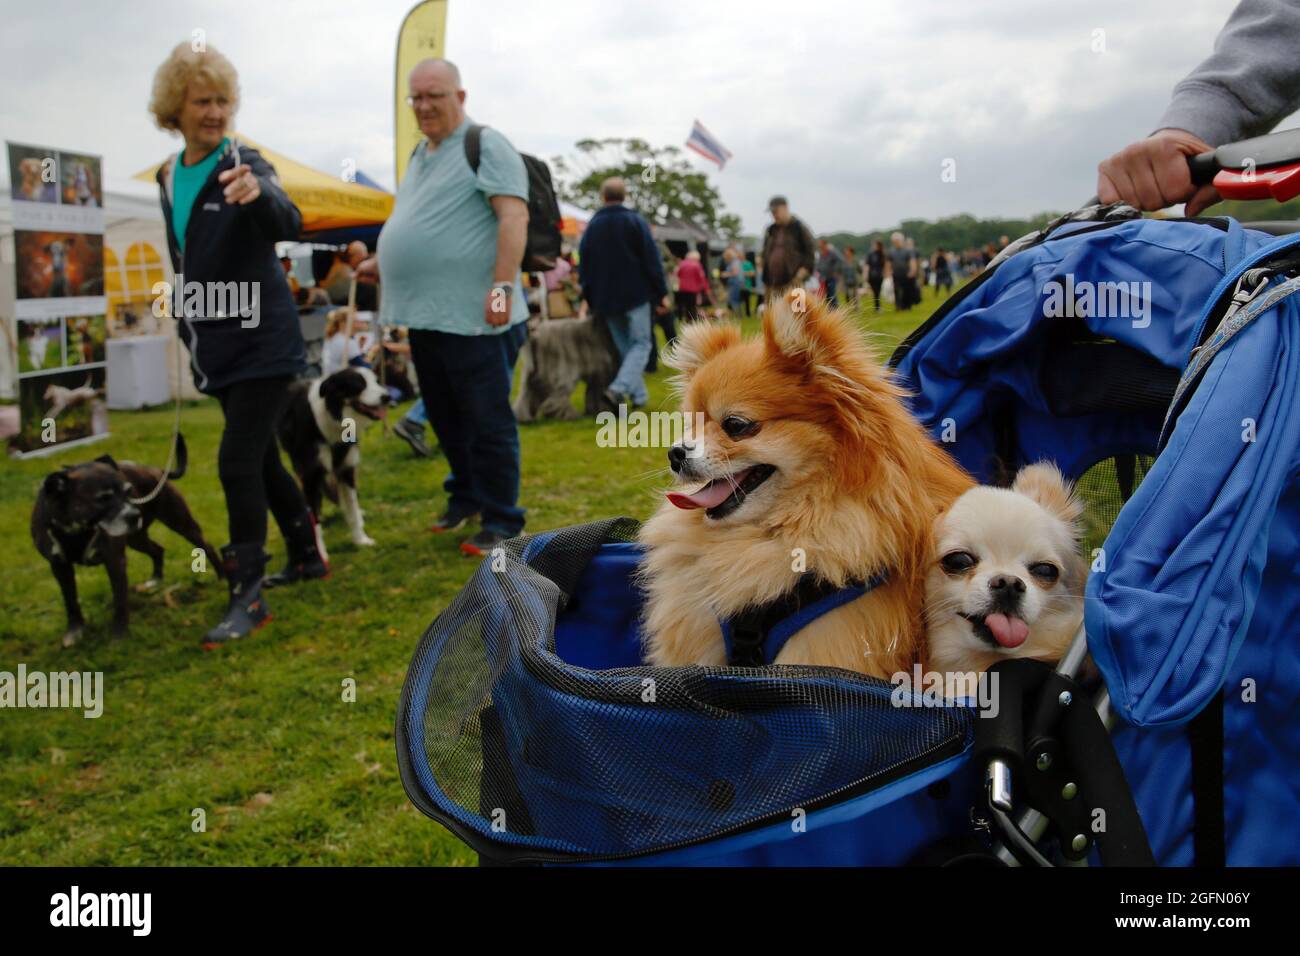 Chiuauas, Rudi and Frosty, are pushed in their pram around in the their pram at the Dogstival, festival for dogs at Pylewell Park near Lymington, in t Stock Photo